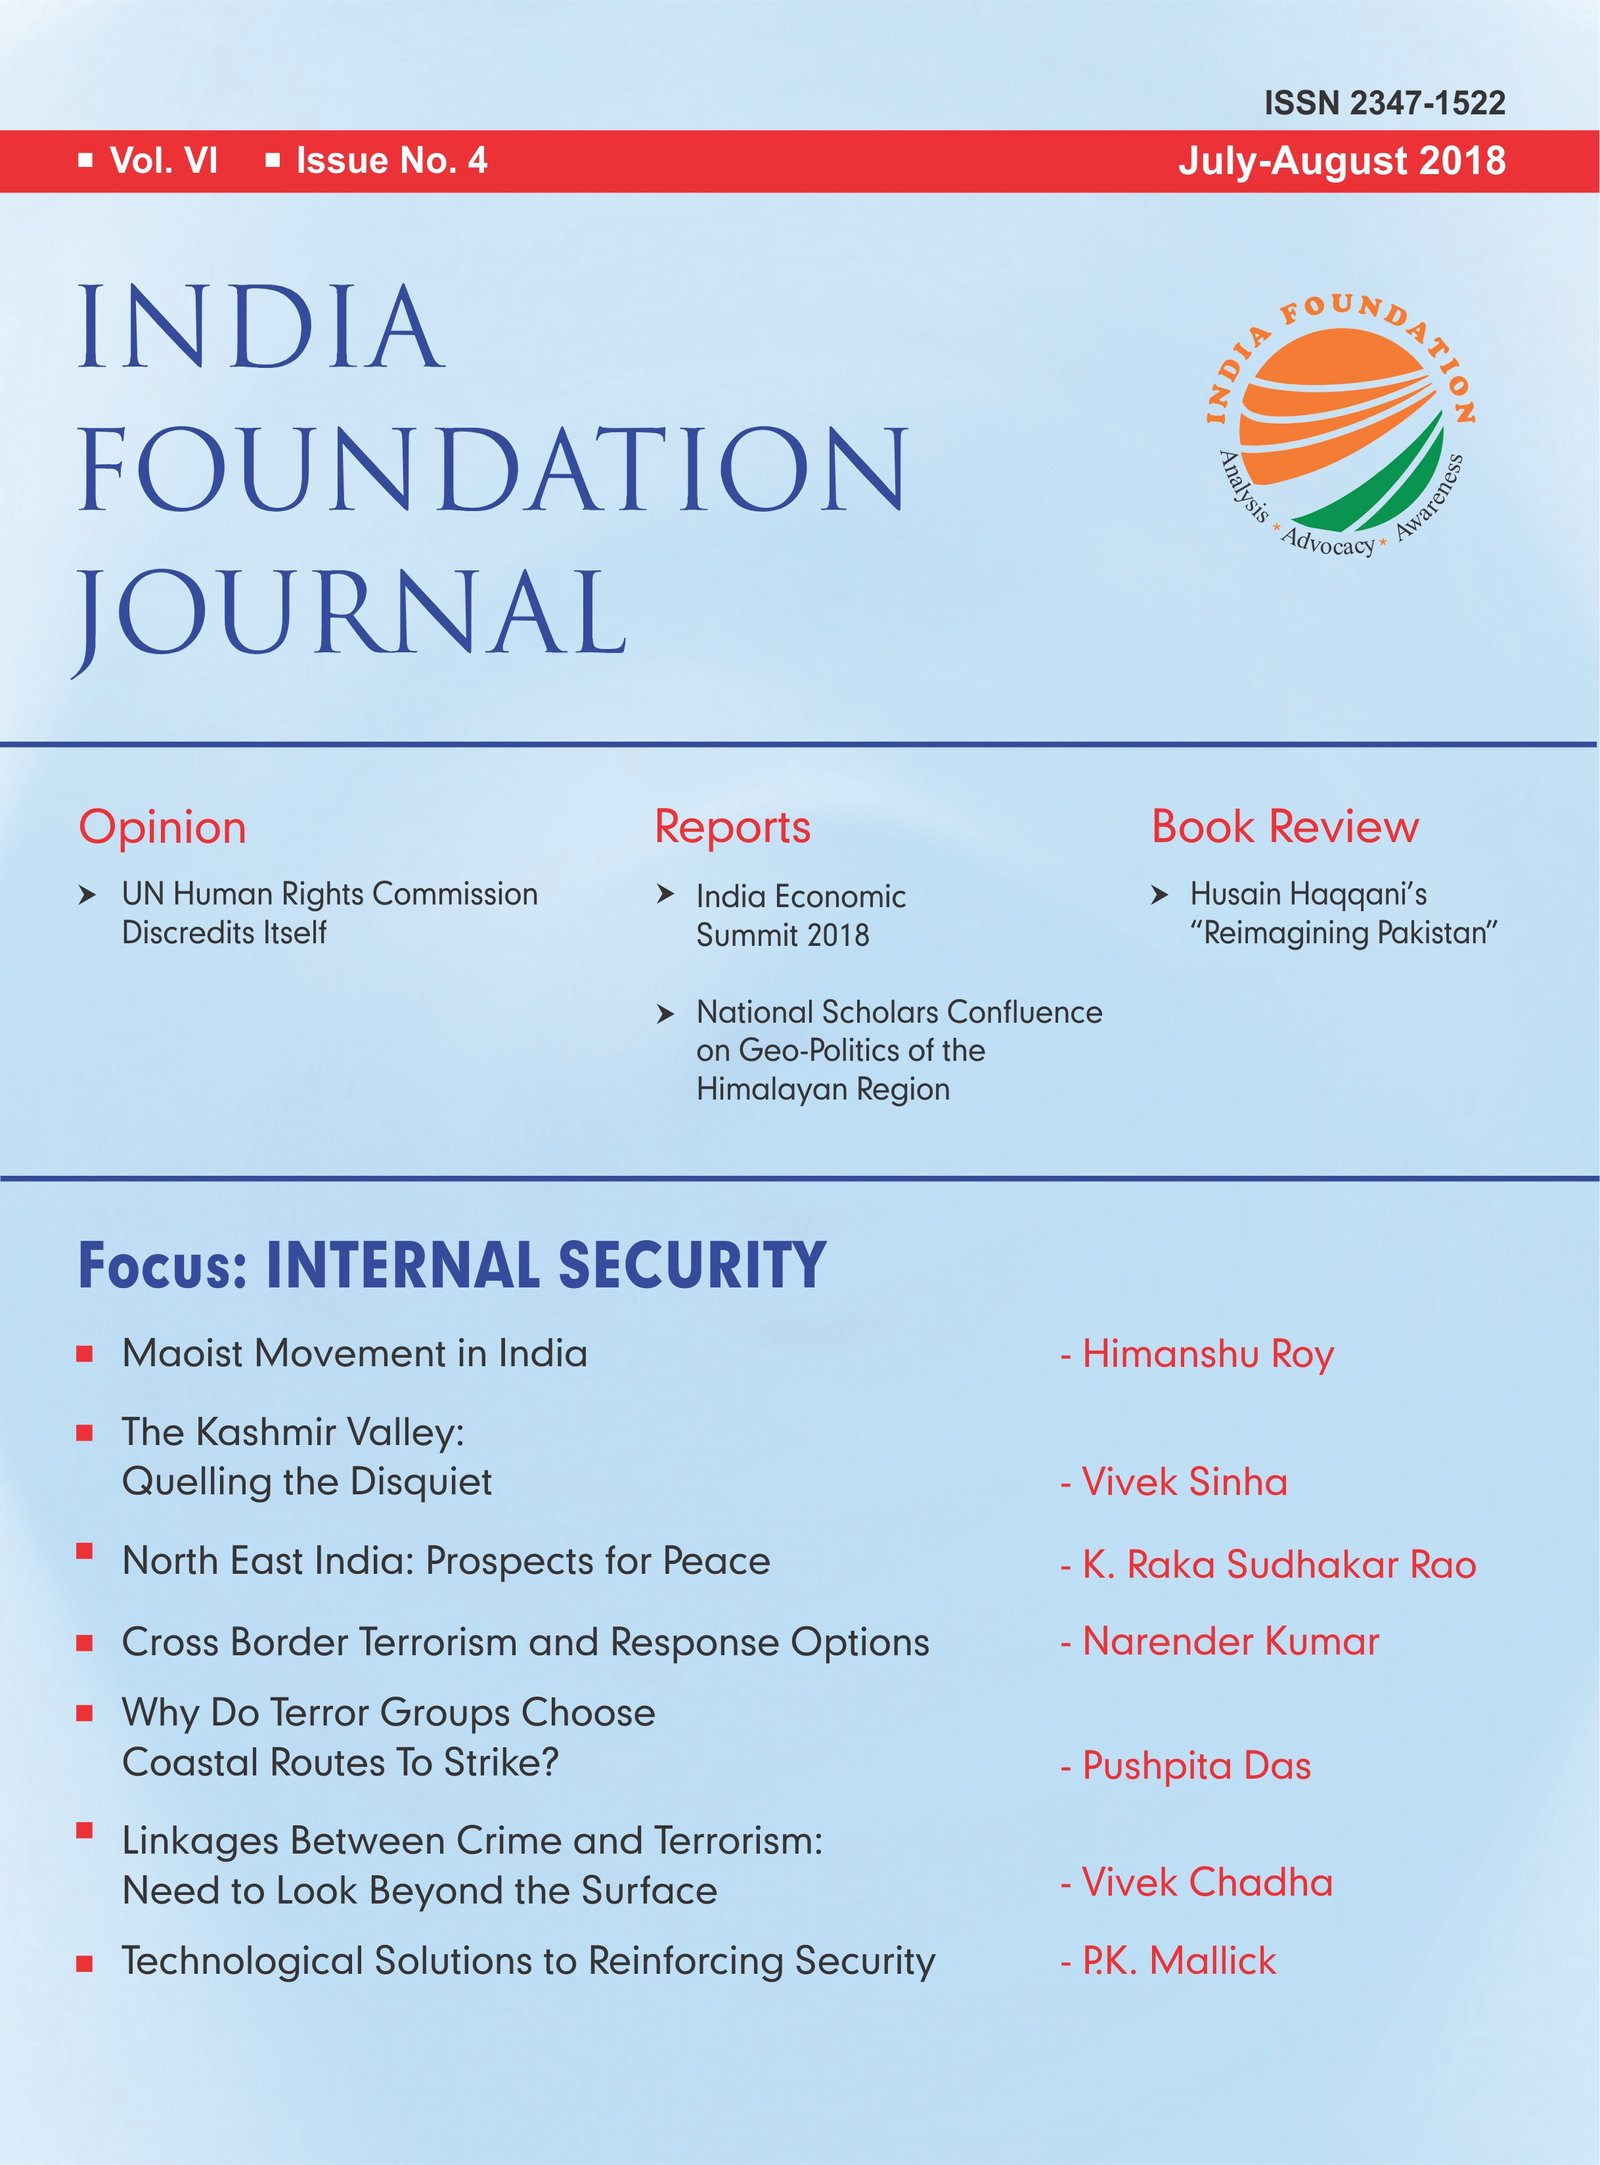 INDIA FOUNDATION JOURNAL July August 2018